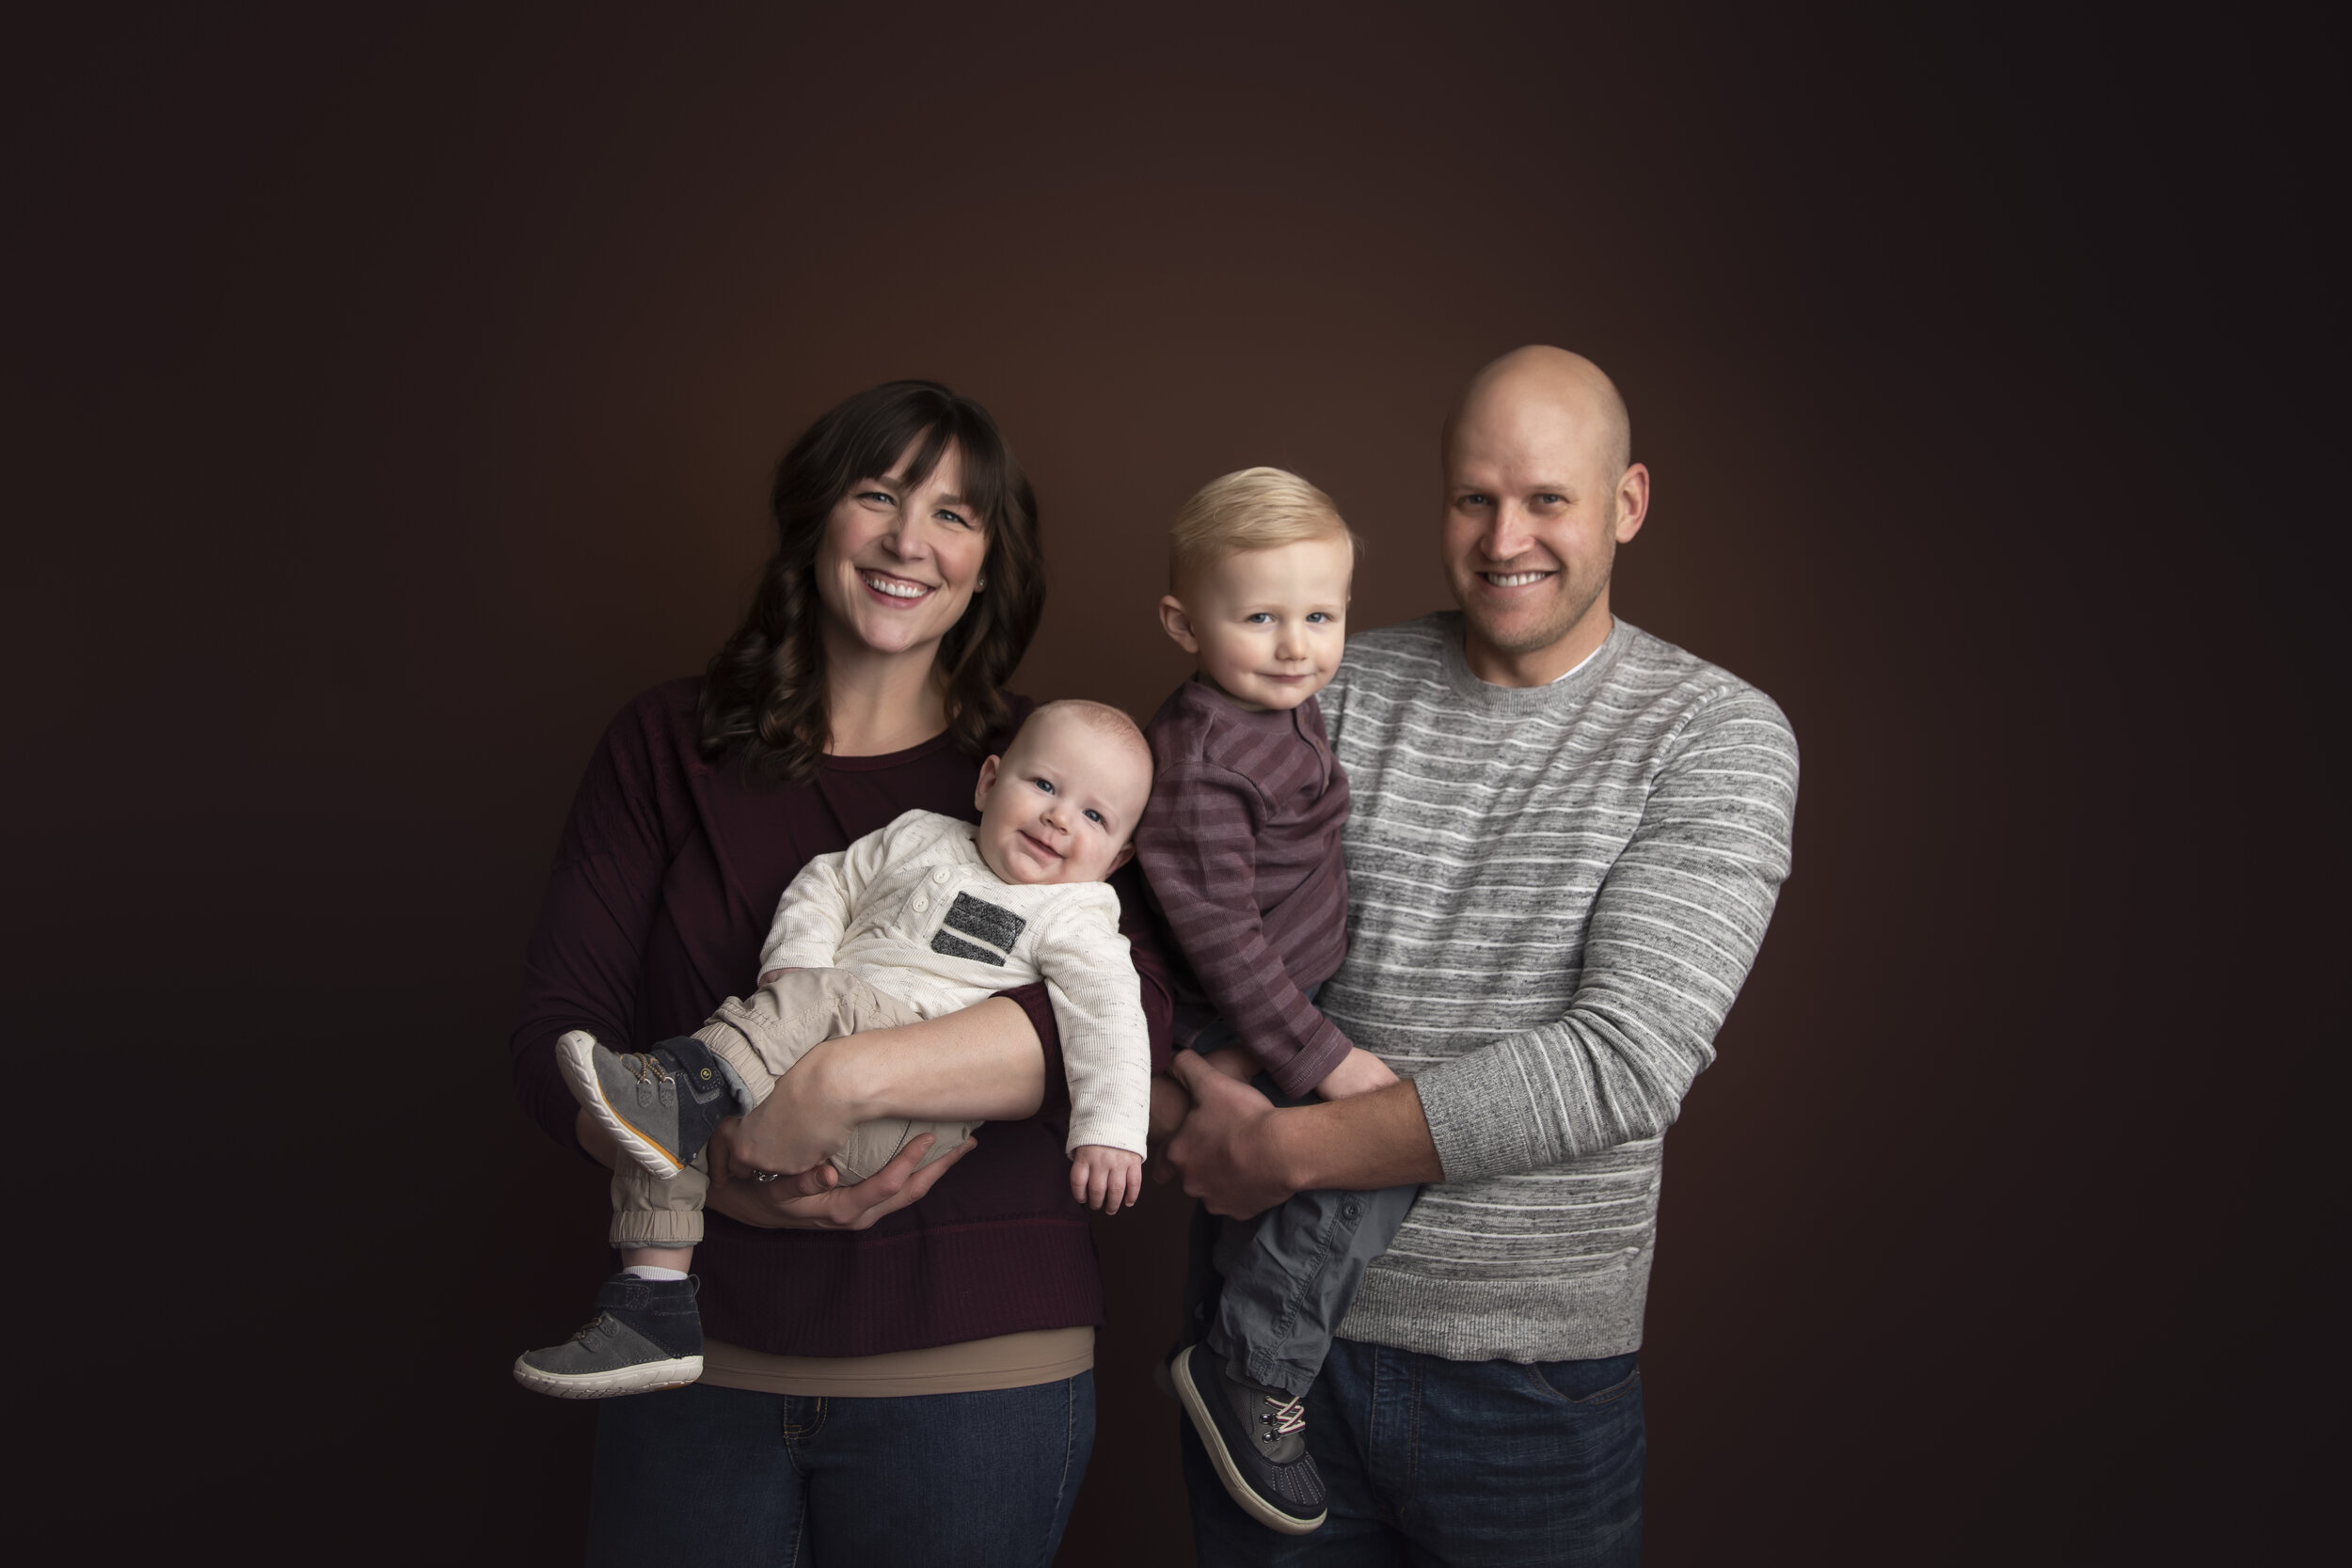 Family Portrait Photography Experience By Mount Studio in